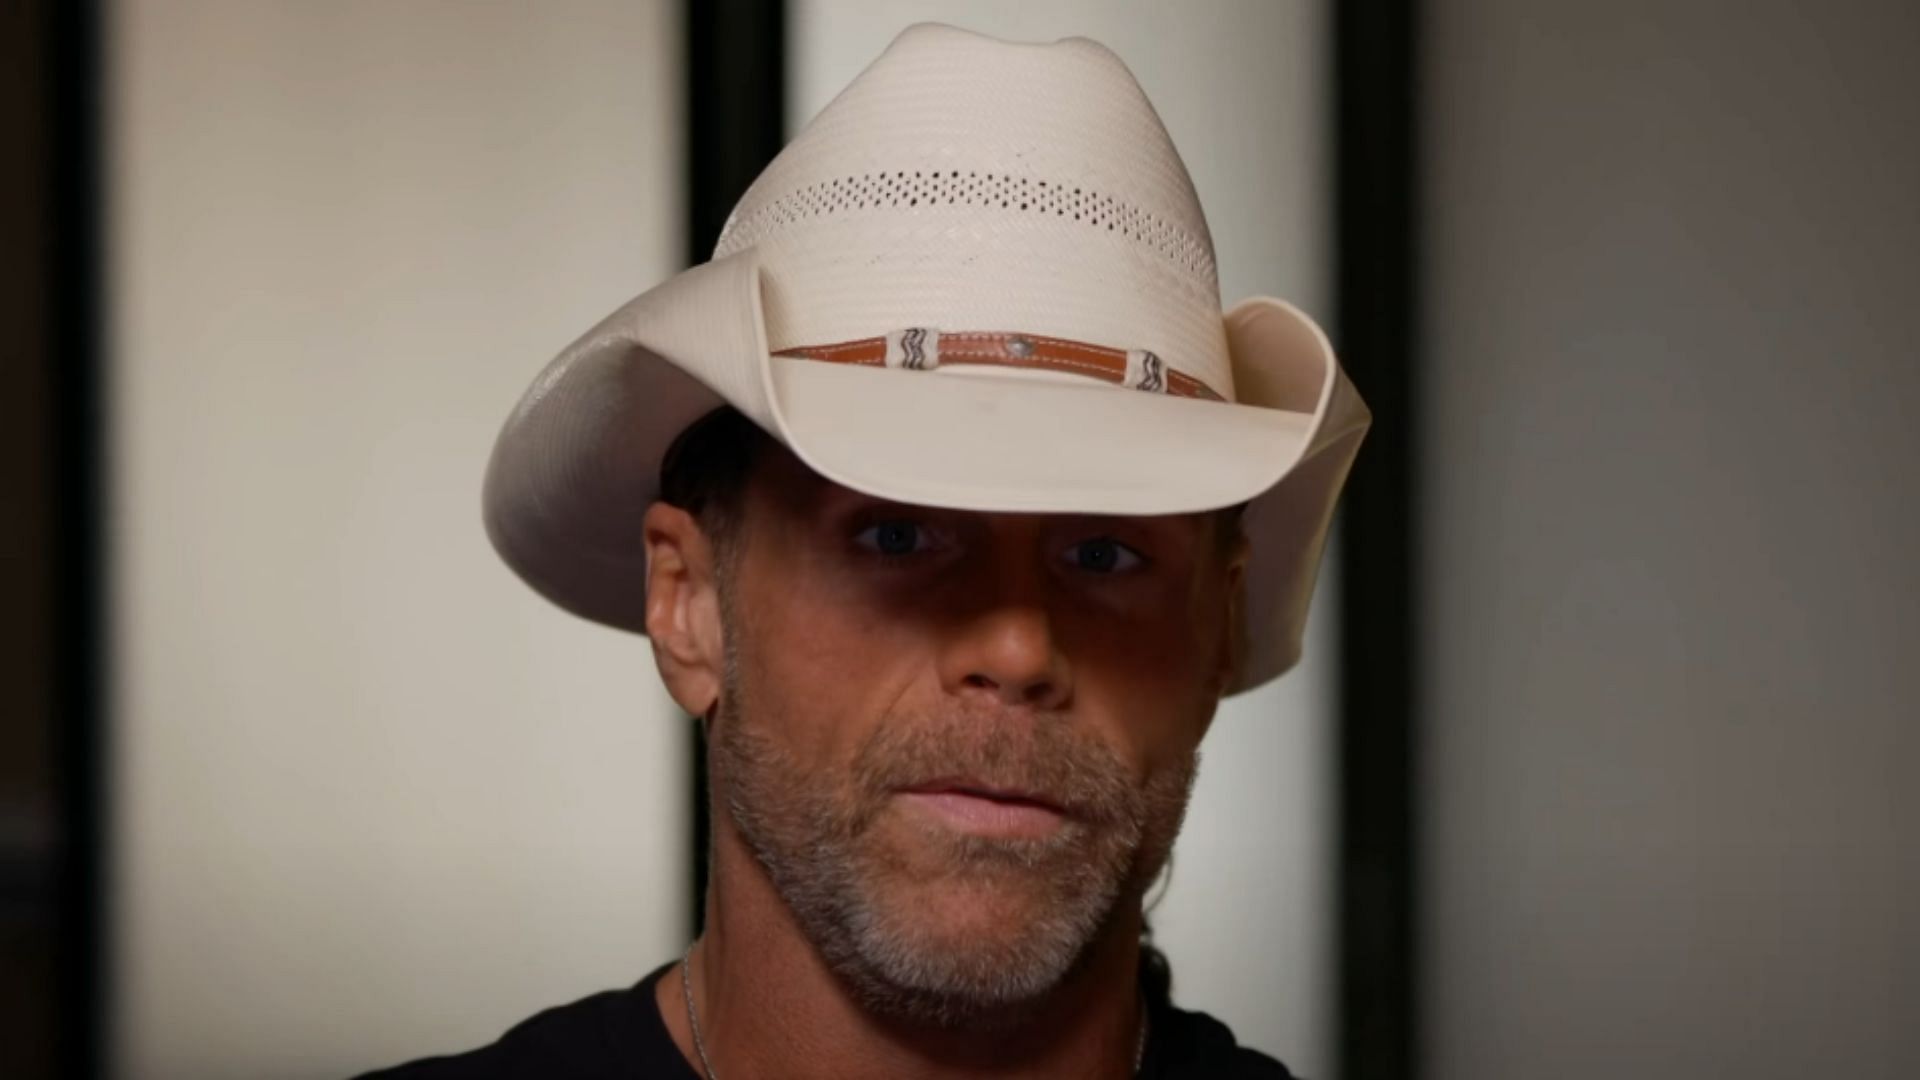 Two-time WWE Hall of Famer Shawn Michaels